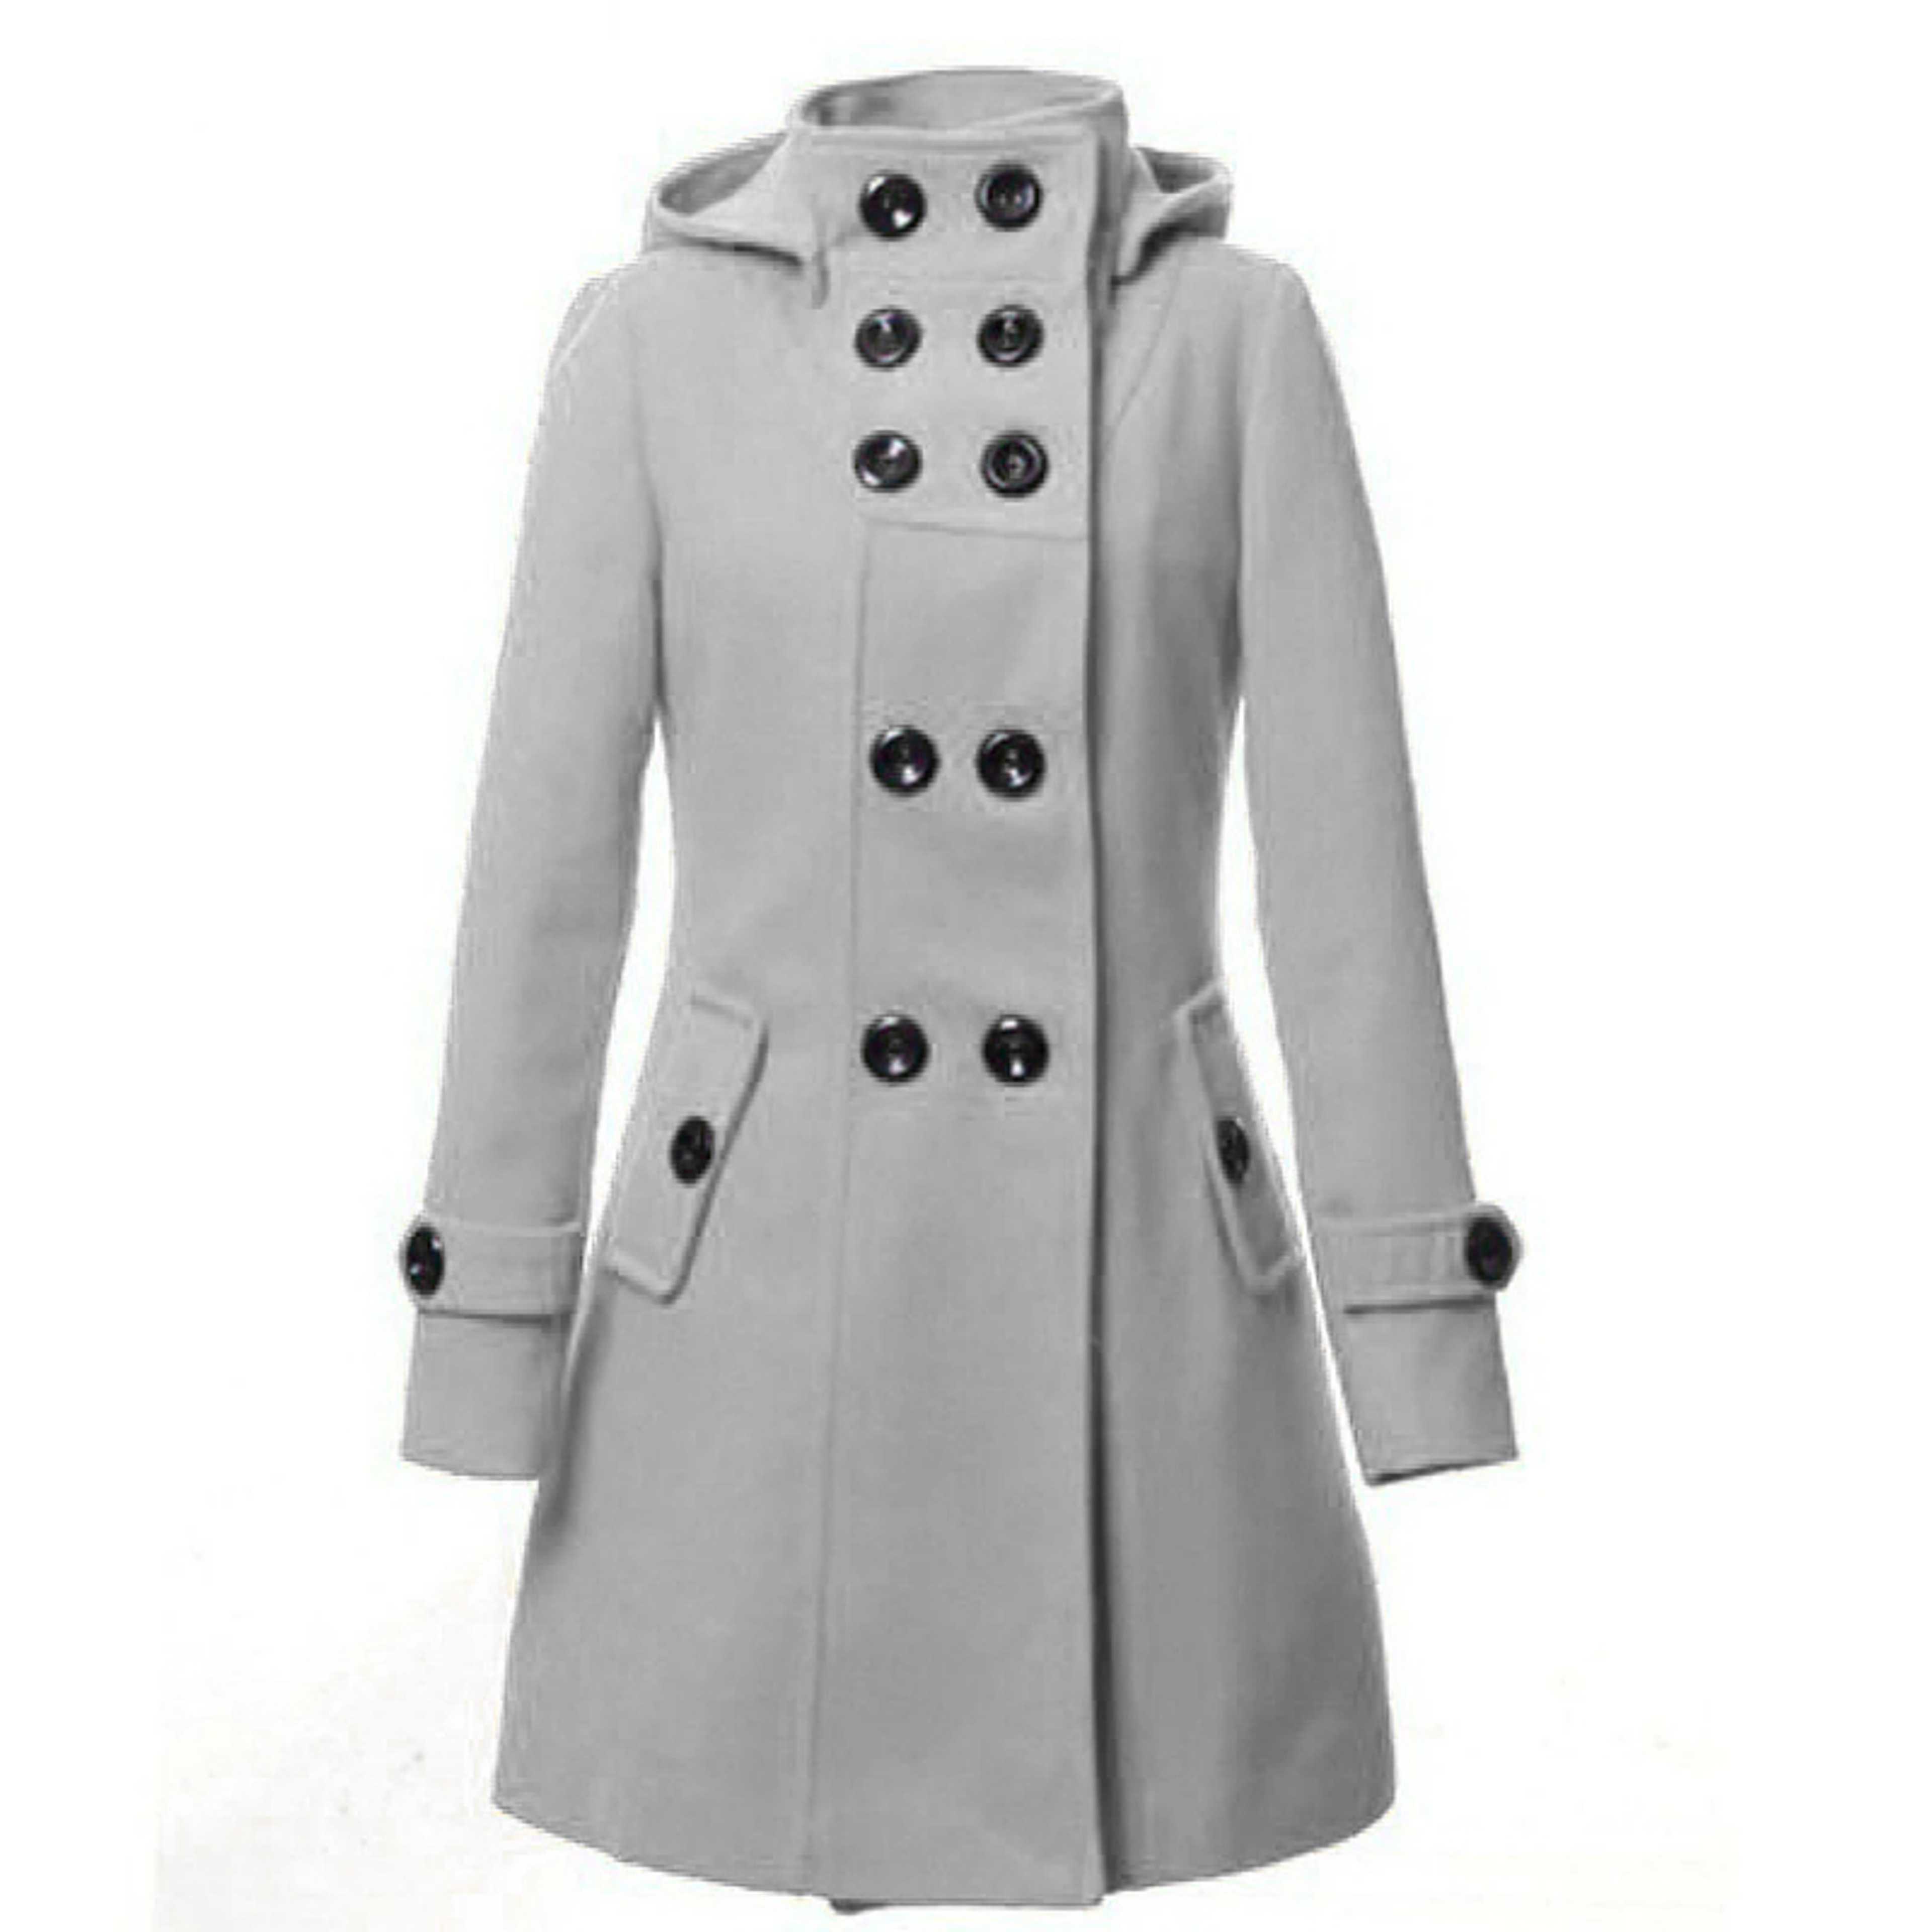 Women's Hooded Double Breasted Trench Wool Coat Long Winter Jackets Outerwear